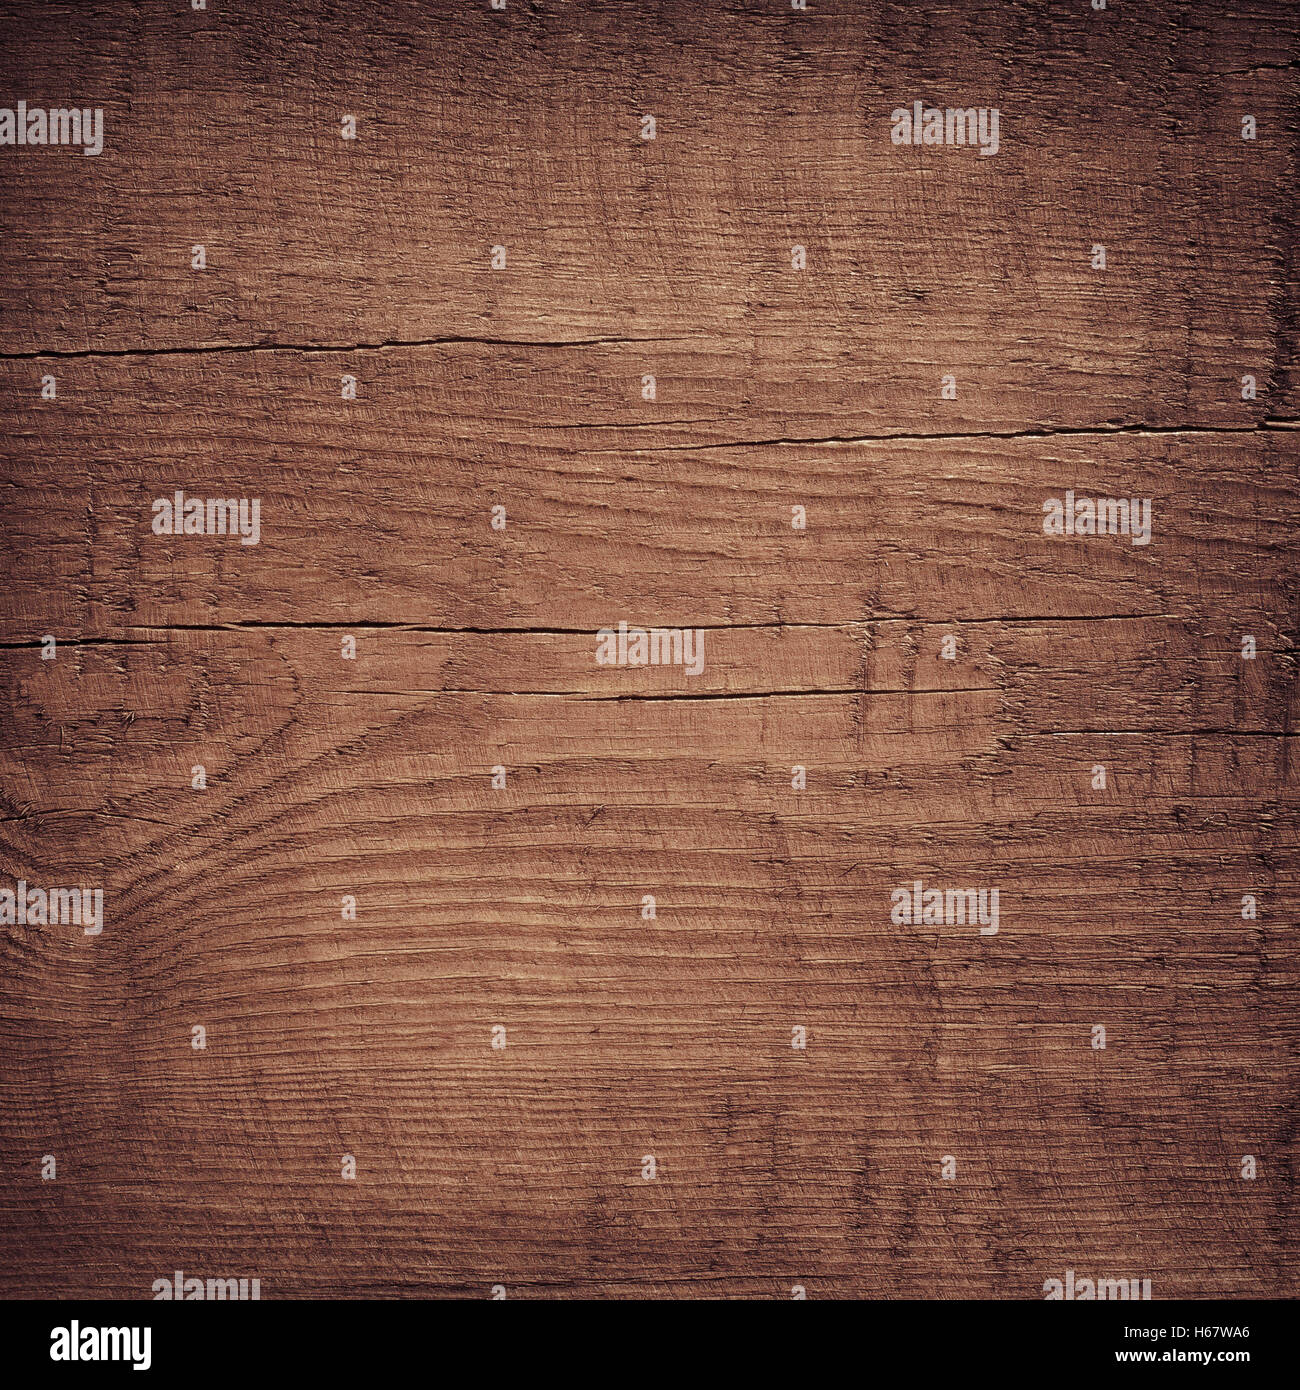 Brow wooden plank, tabletop, floor surface or chopping, cutting board. Stock Photo